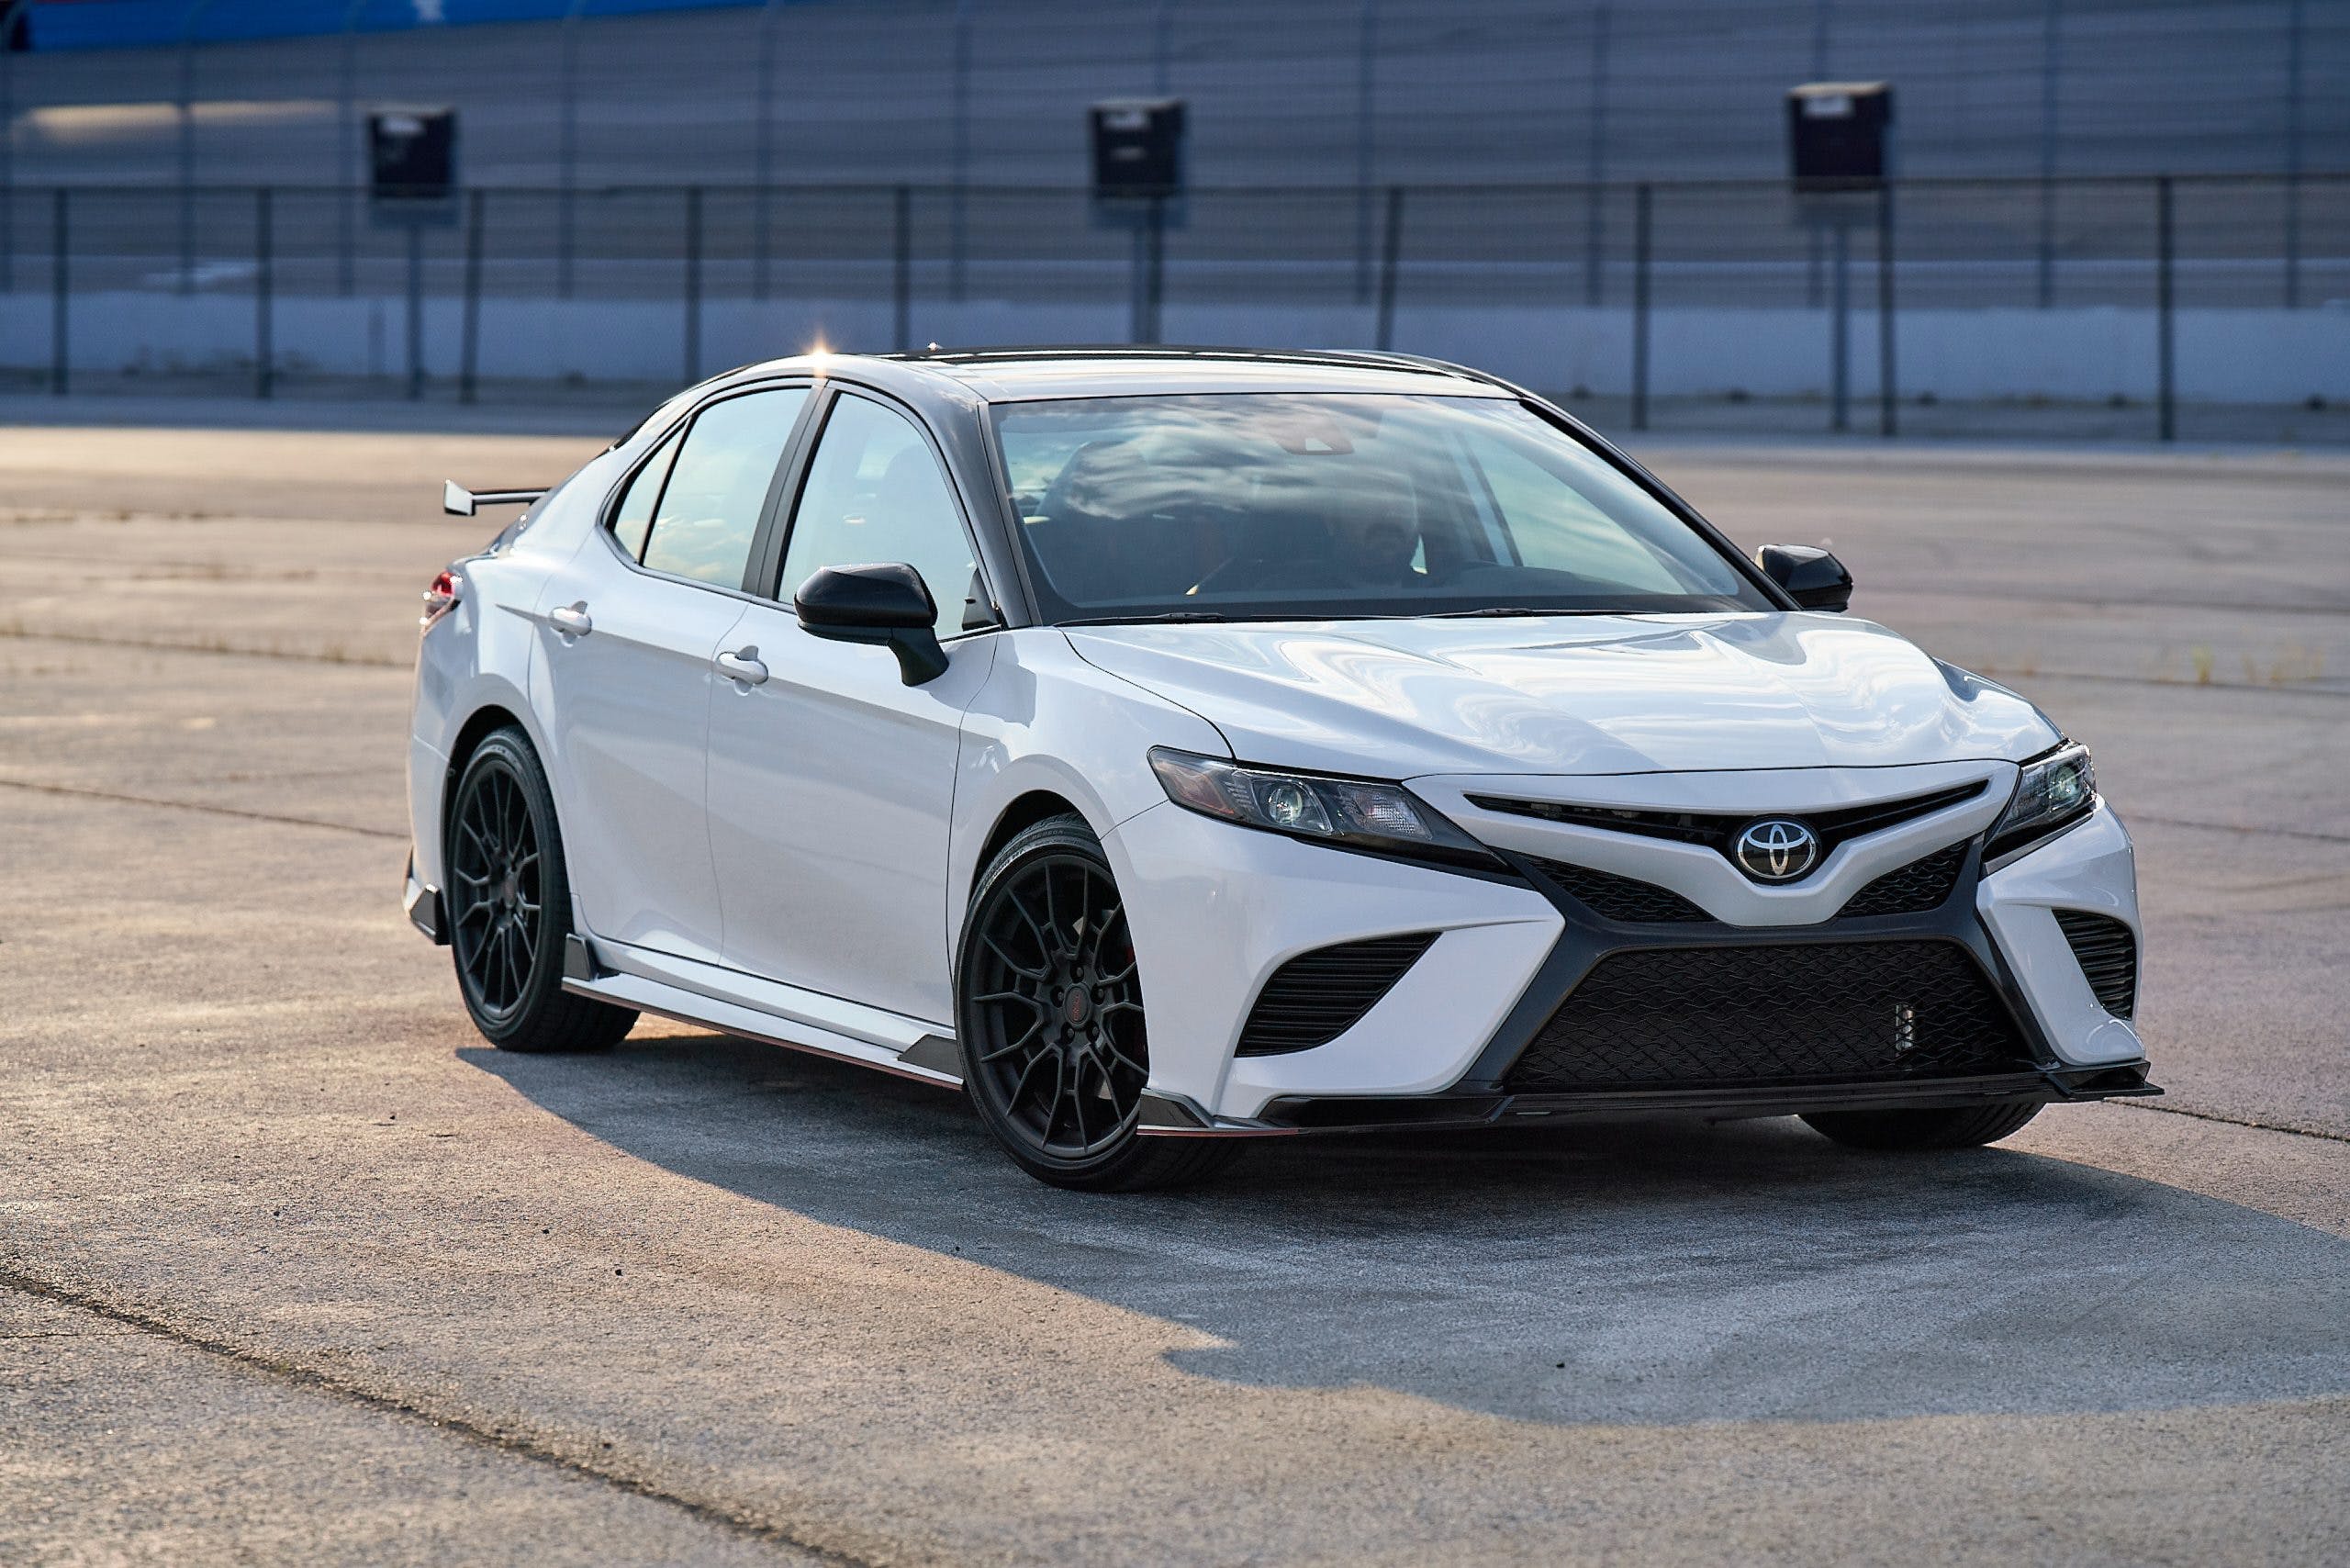 Test Drive: 2022 Toyota Camry TRD Review - CARFAX